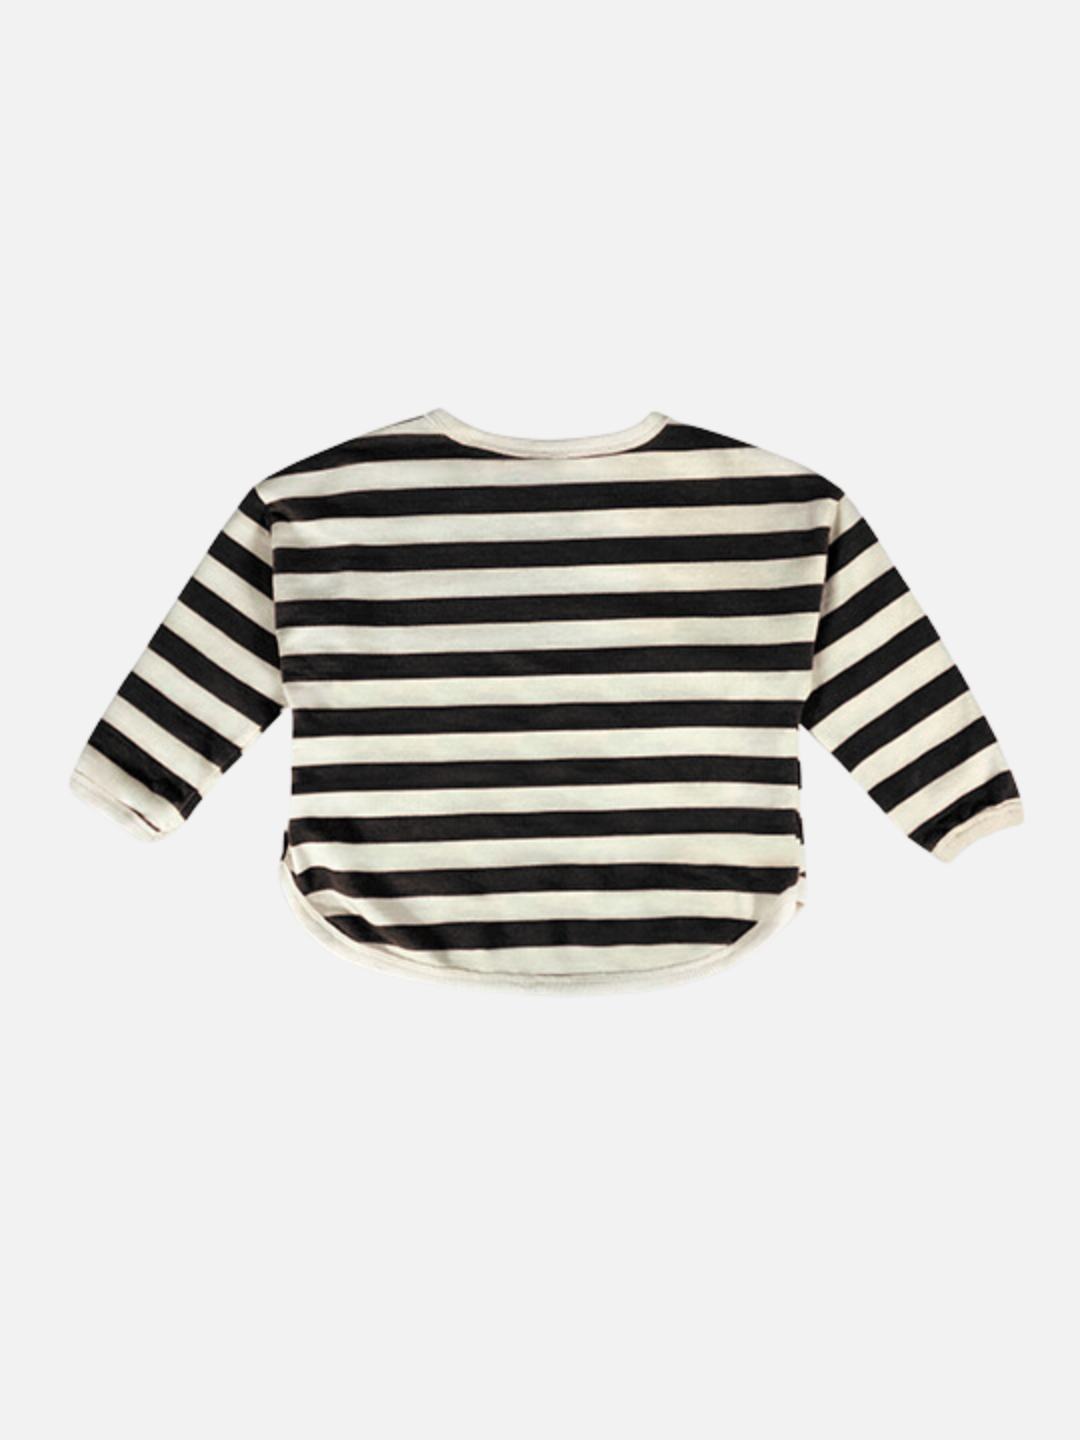 A kids' tee shirt with a curved hem in black and white stripes, back view